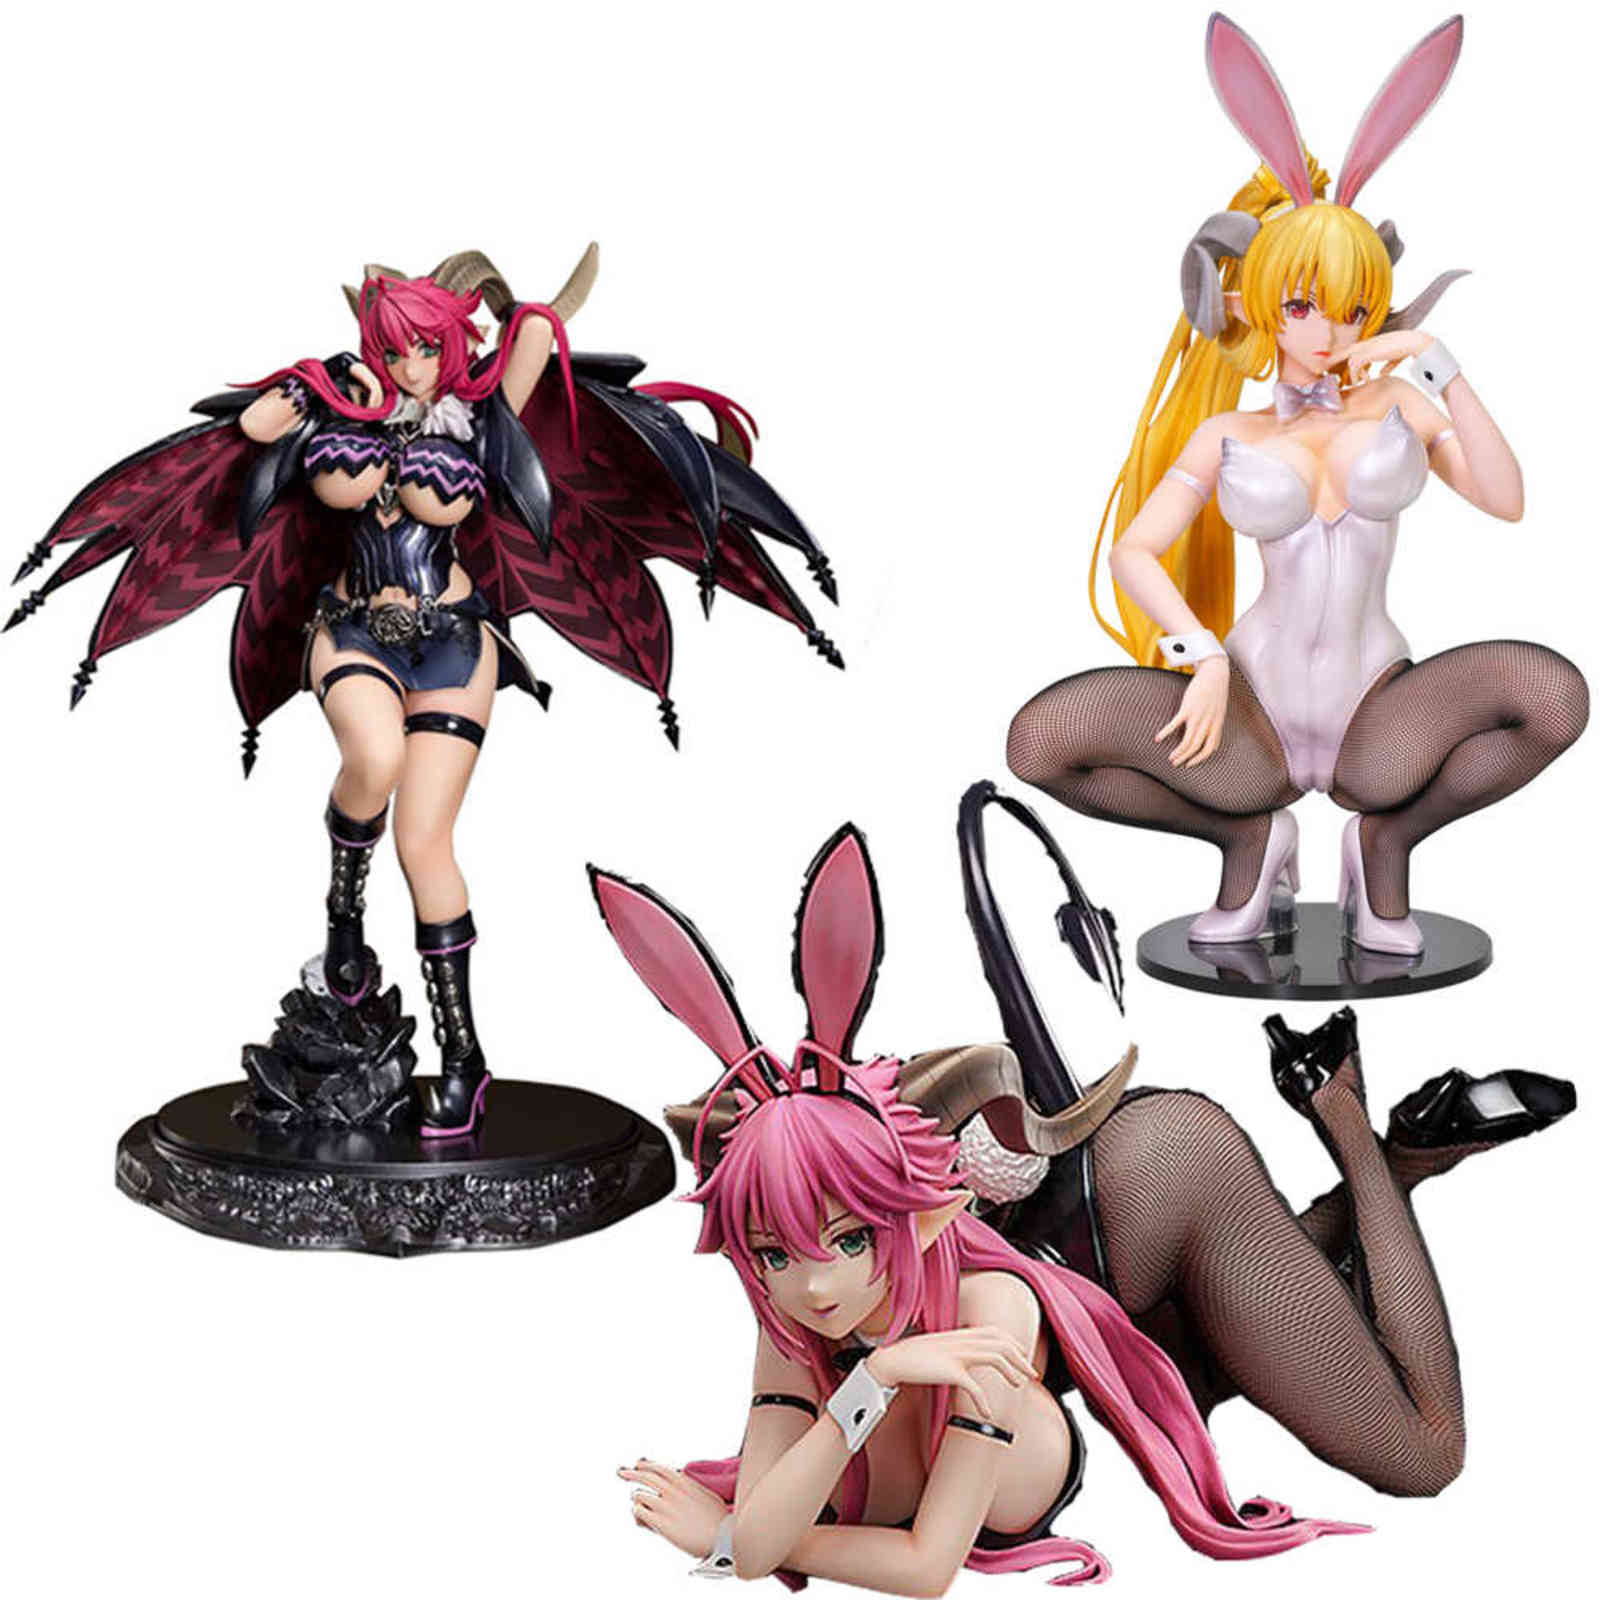 

Bunny Lucifer Asmodeus Seven Deadly Sins B-STYLE FREEing Sexy girl PVC Action Figure Toy Anime Adult Collectible Model Doll Gift H1105, No retail box